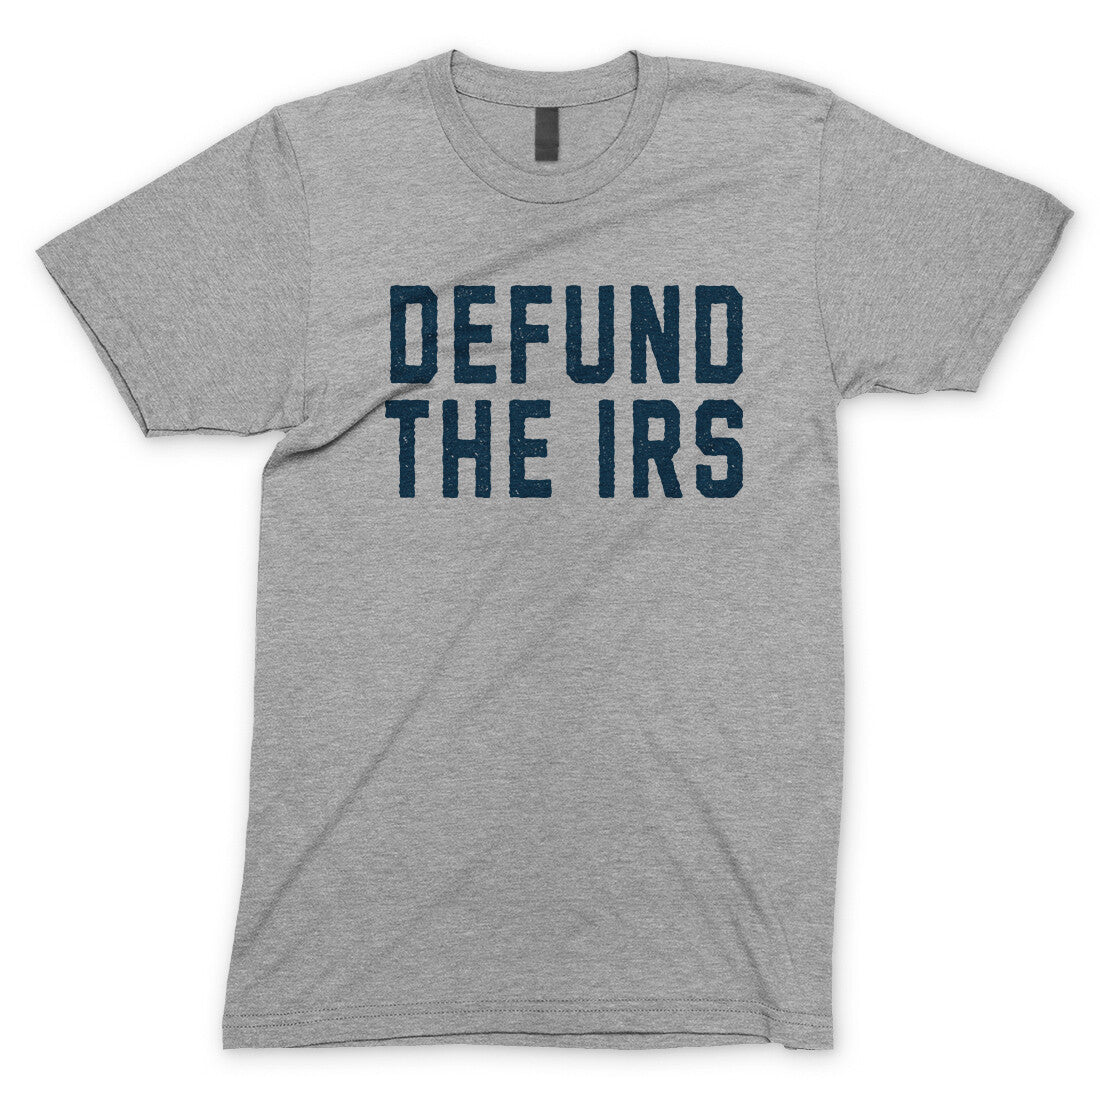 Defund the IRS in Sport Grey Color